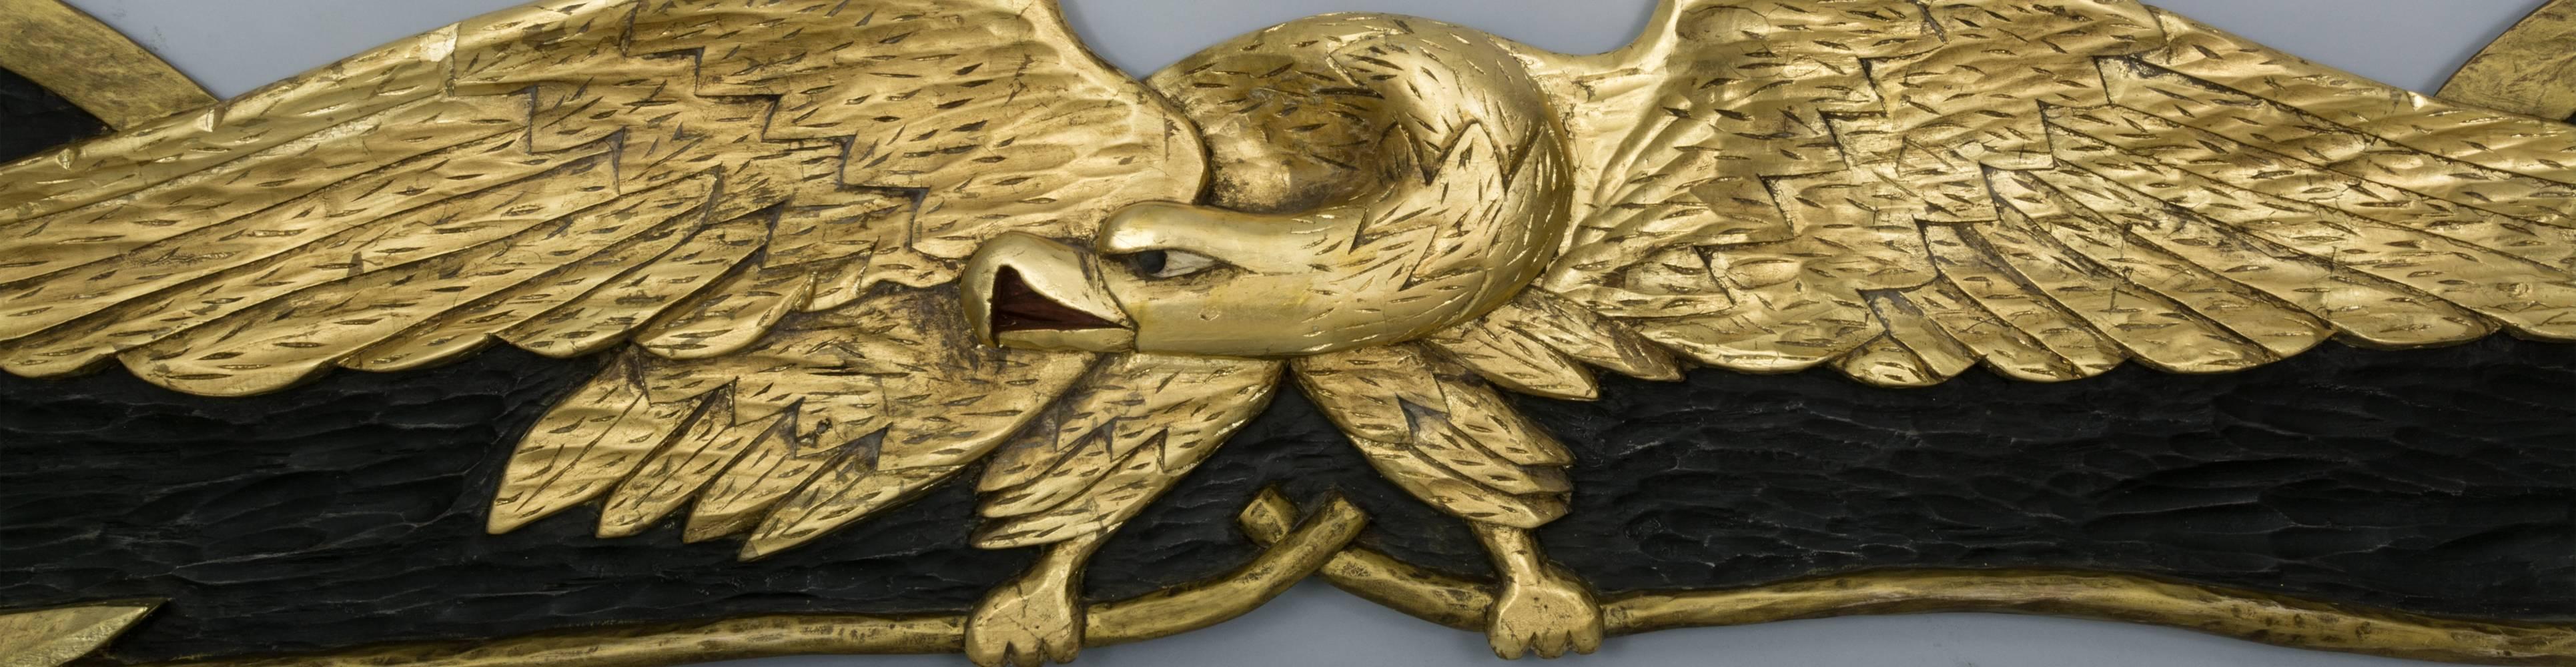 Large stern board eagle plaque depicting a displayed.
Eagle clutching arrows in its talons with a scrolled
backboard. Carved from a single piece of pine with
gold leaf and black painted ground. Signed on the back
“Dick Steele Rockport